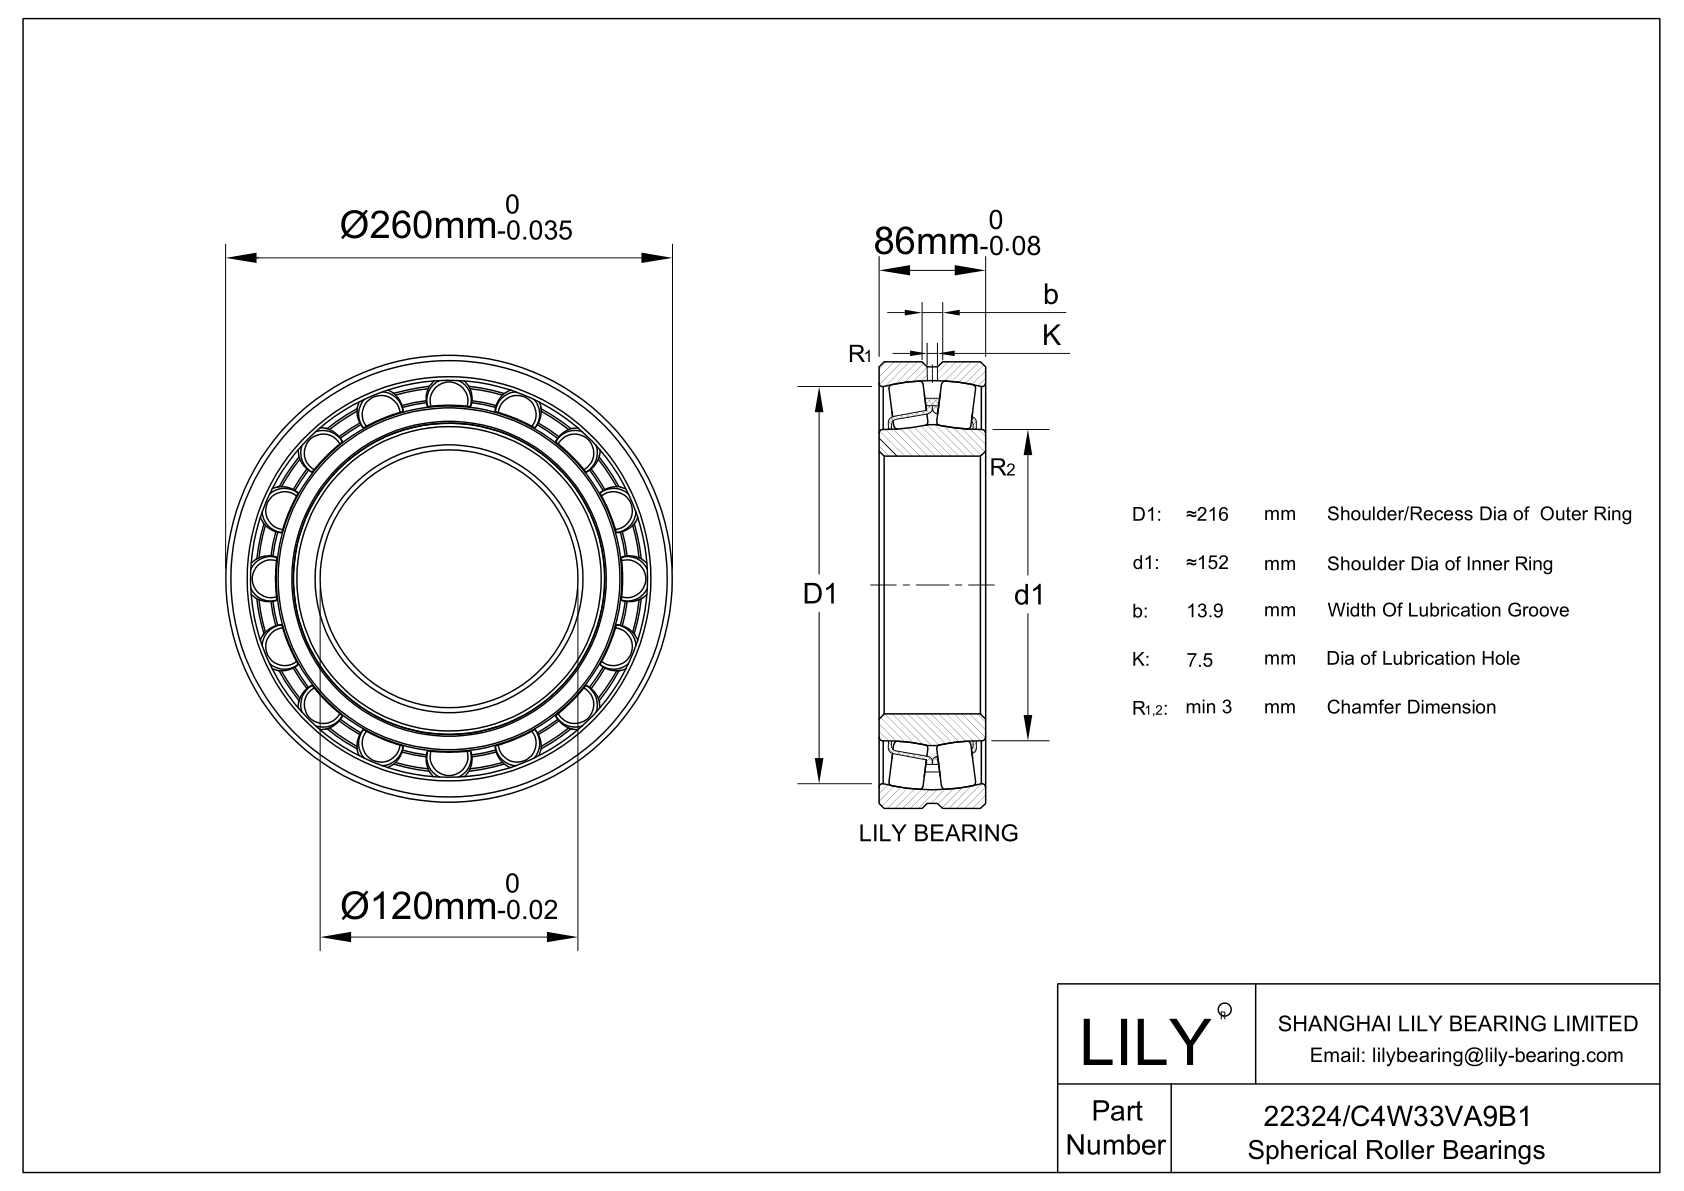 22324/C4W33VA9B1 Double Row Spherical Roller Bearing cad drawing